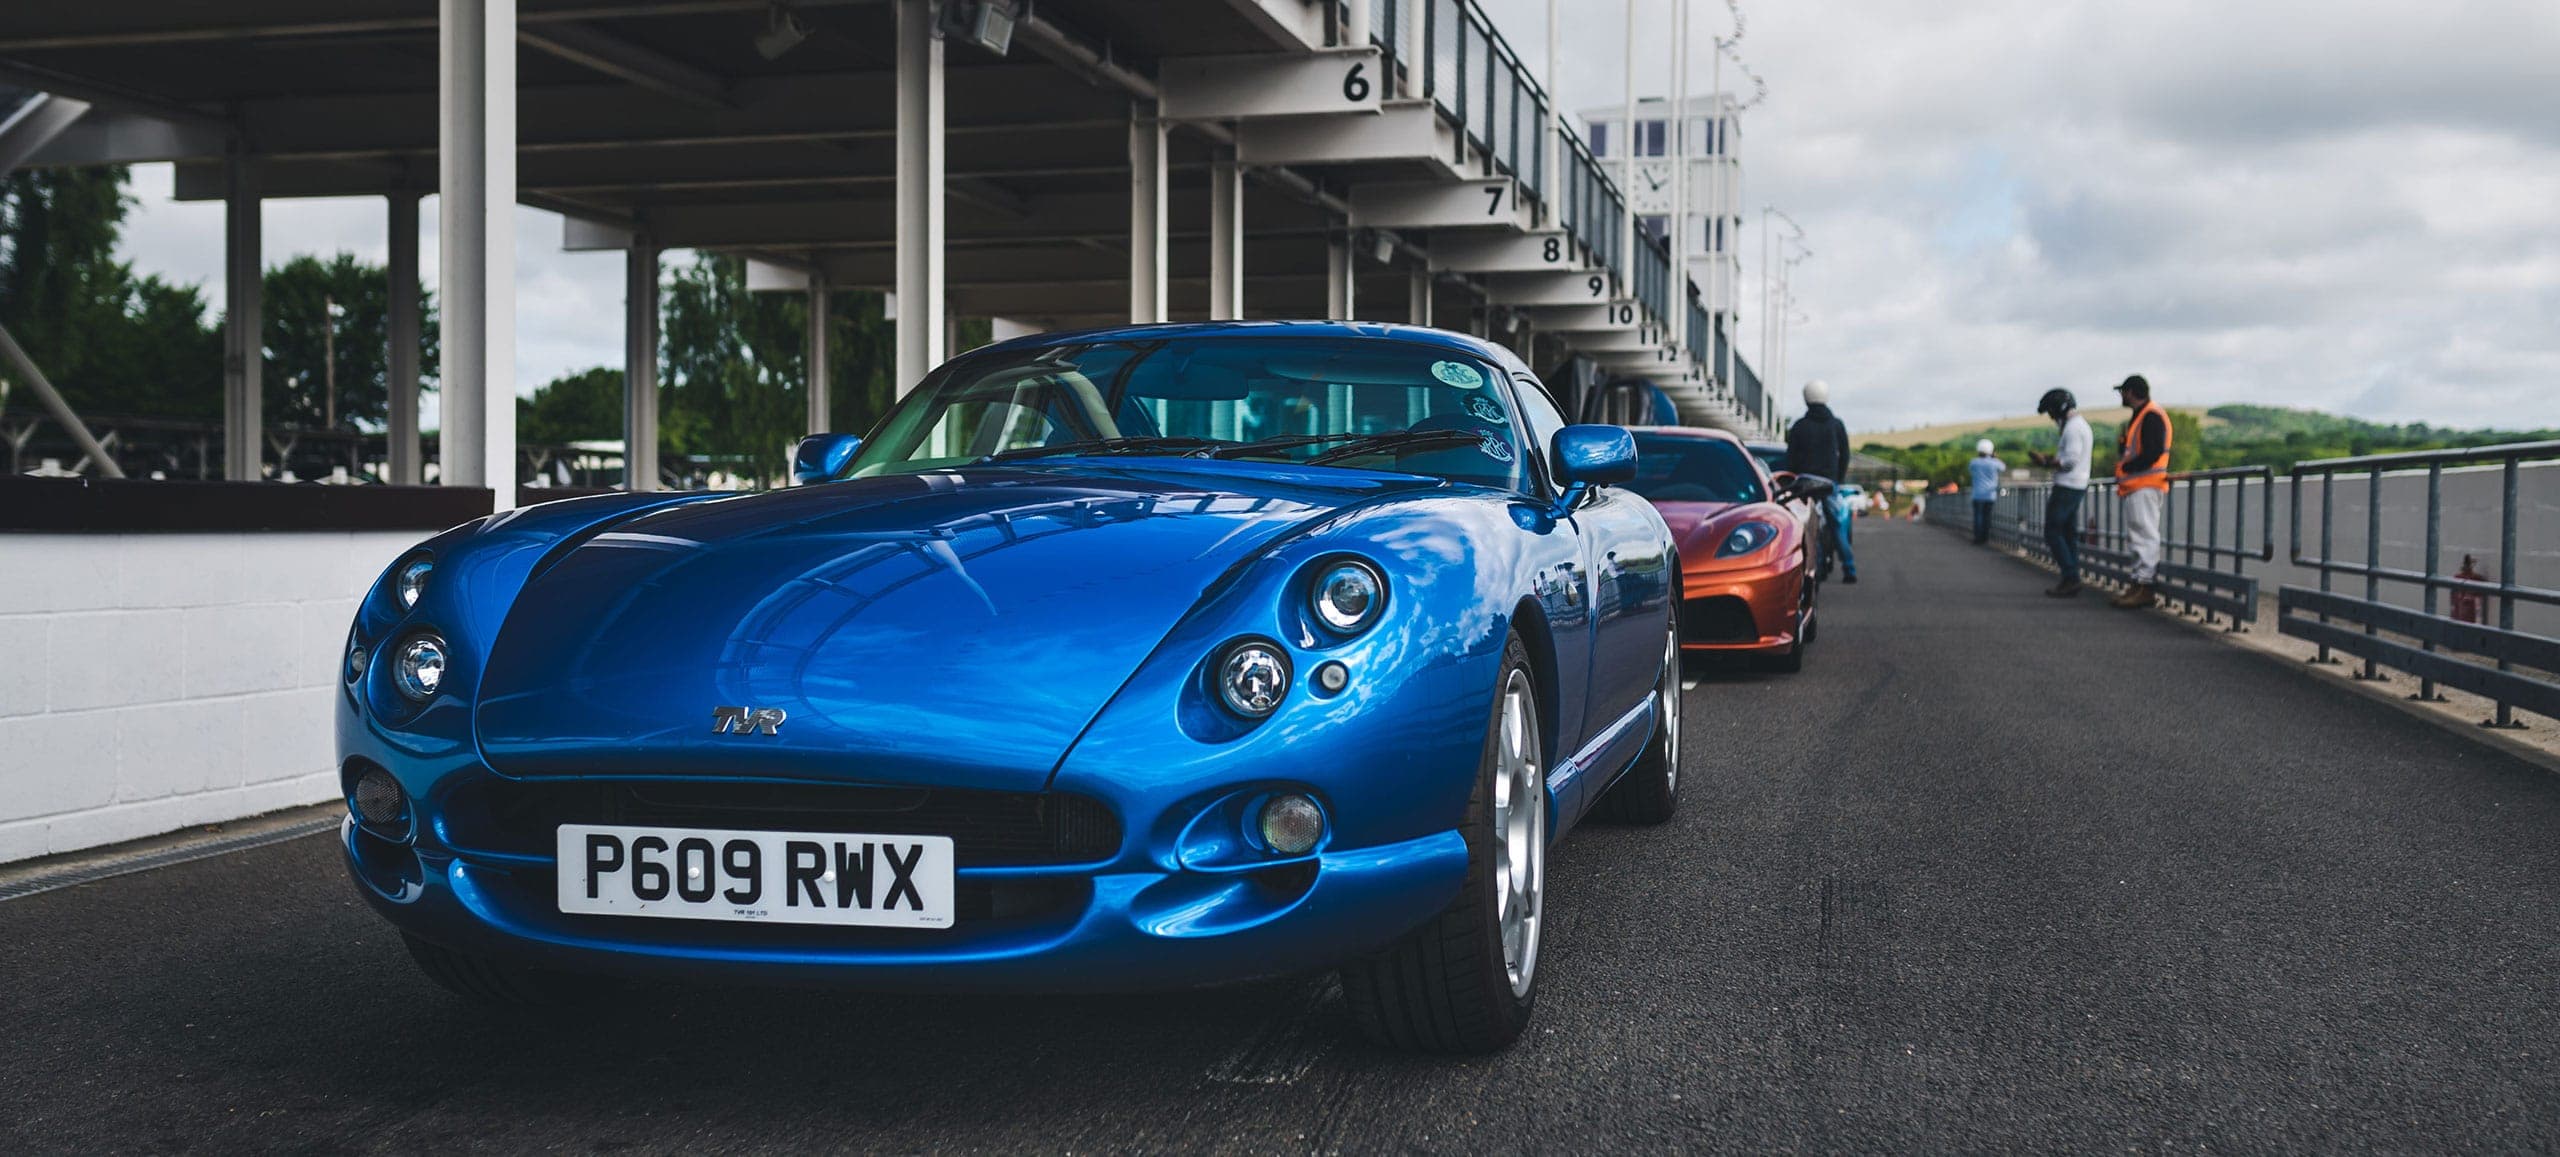 A blue TVR at a Salone Events Track Day